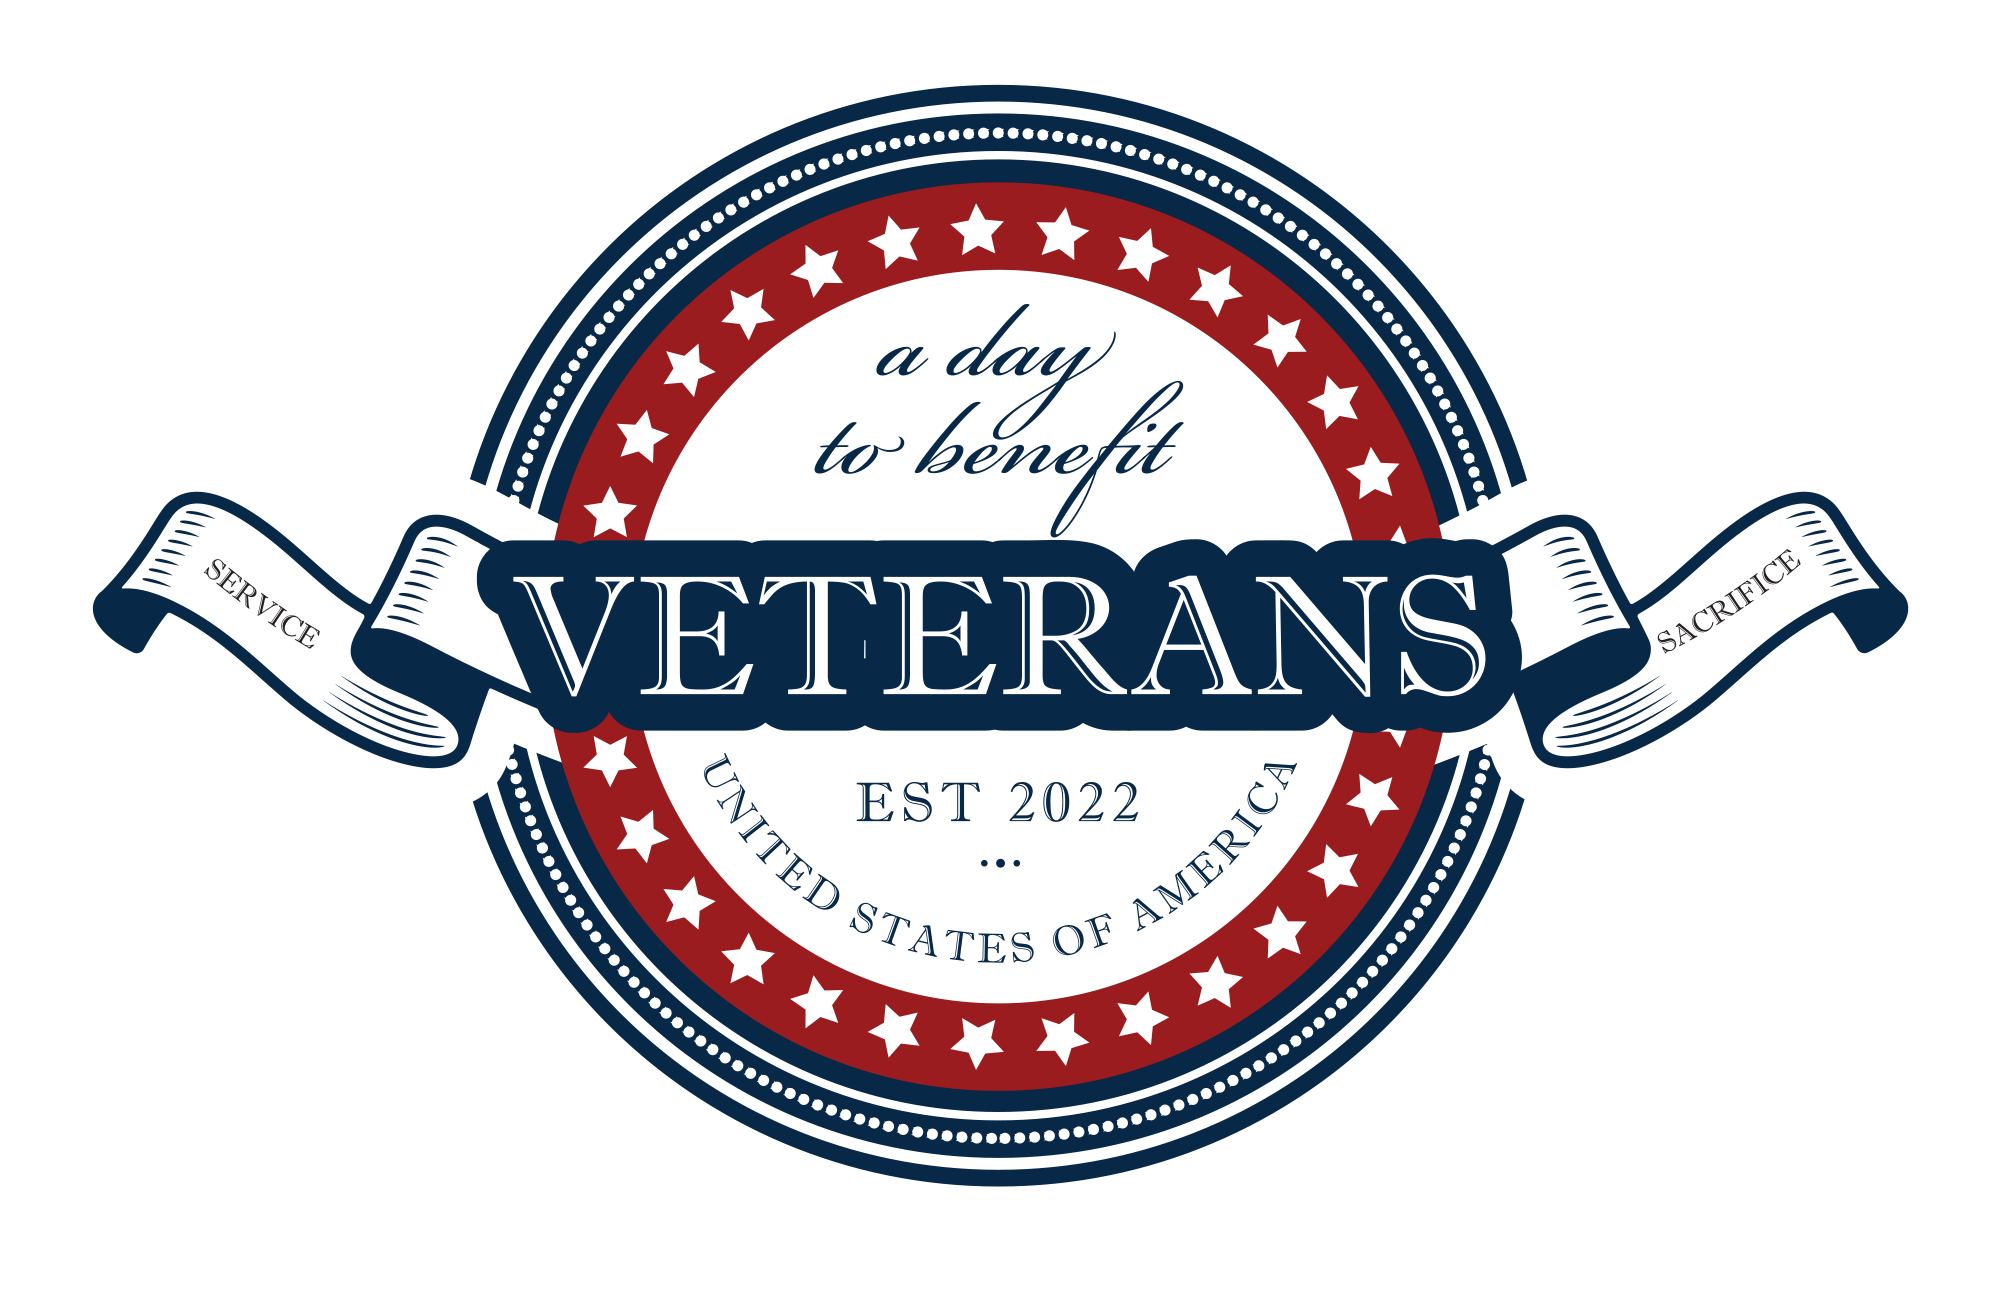 A Day to Benefit Veterans Inc